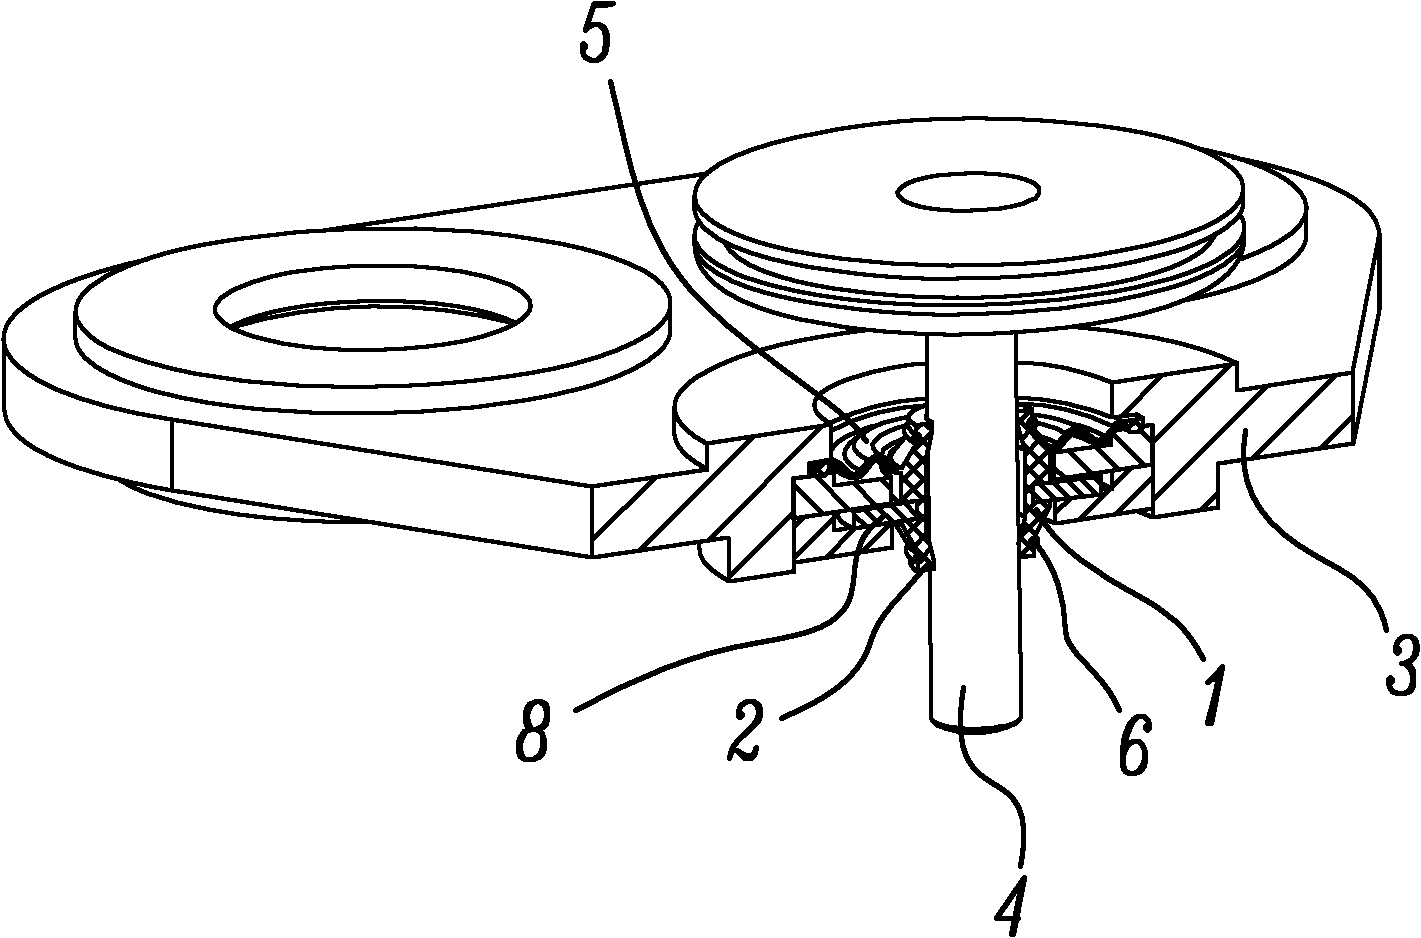 Reciprocating oil seal structure of compressor